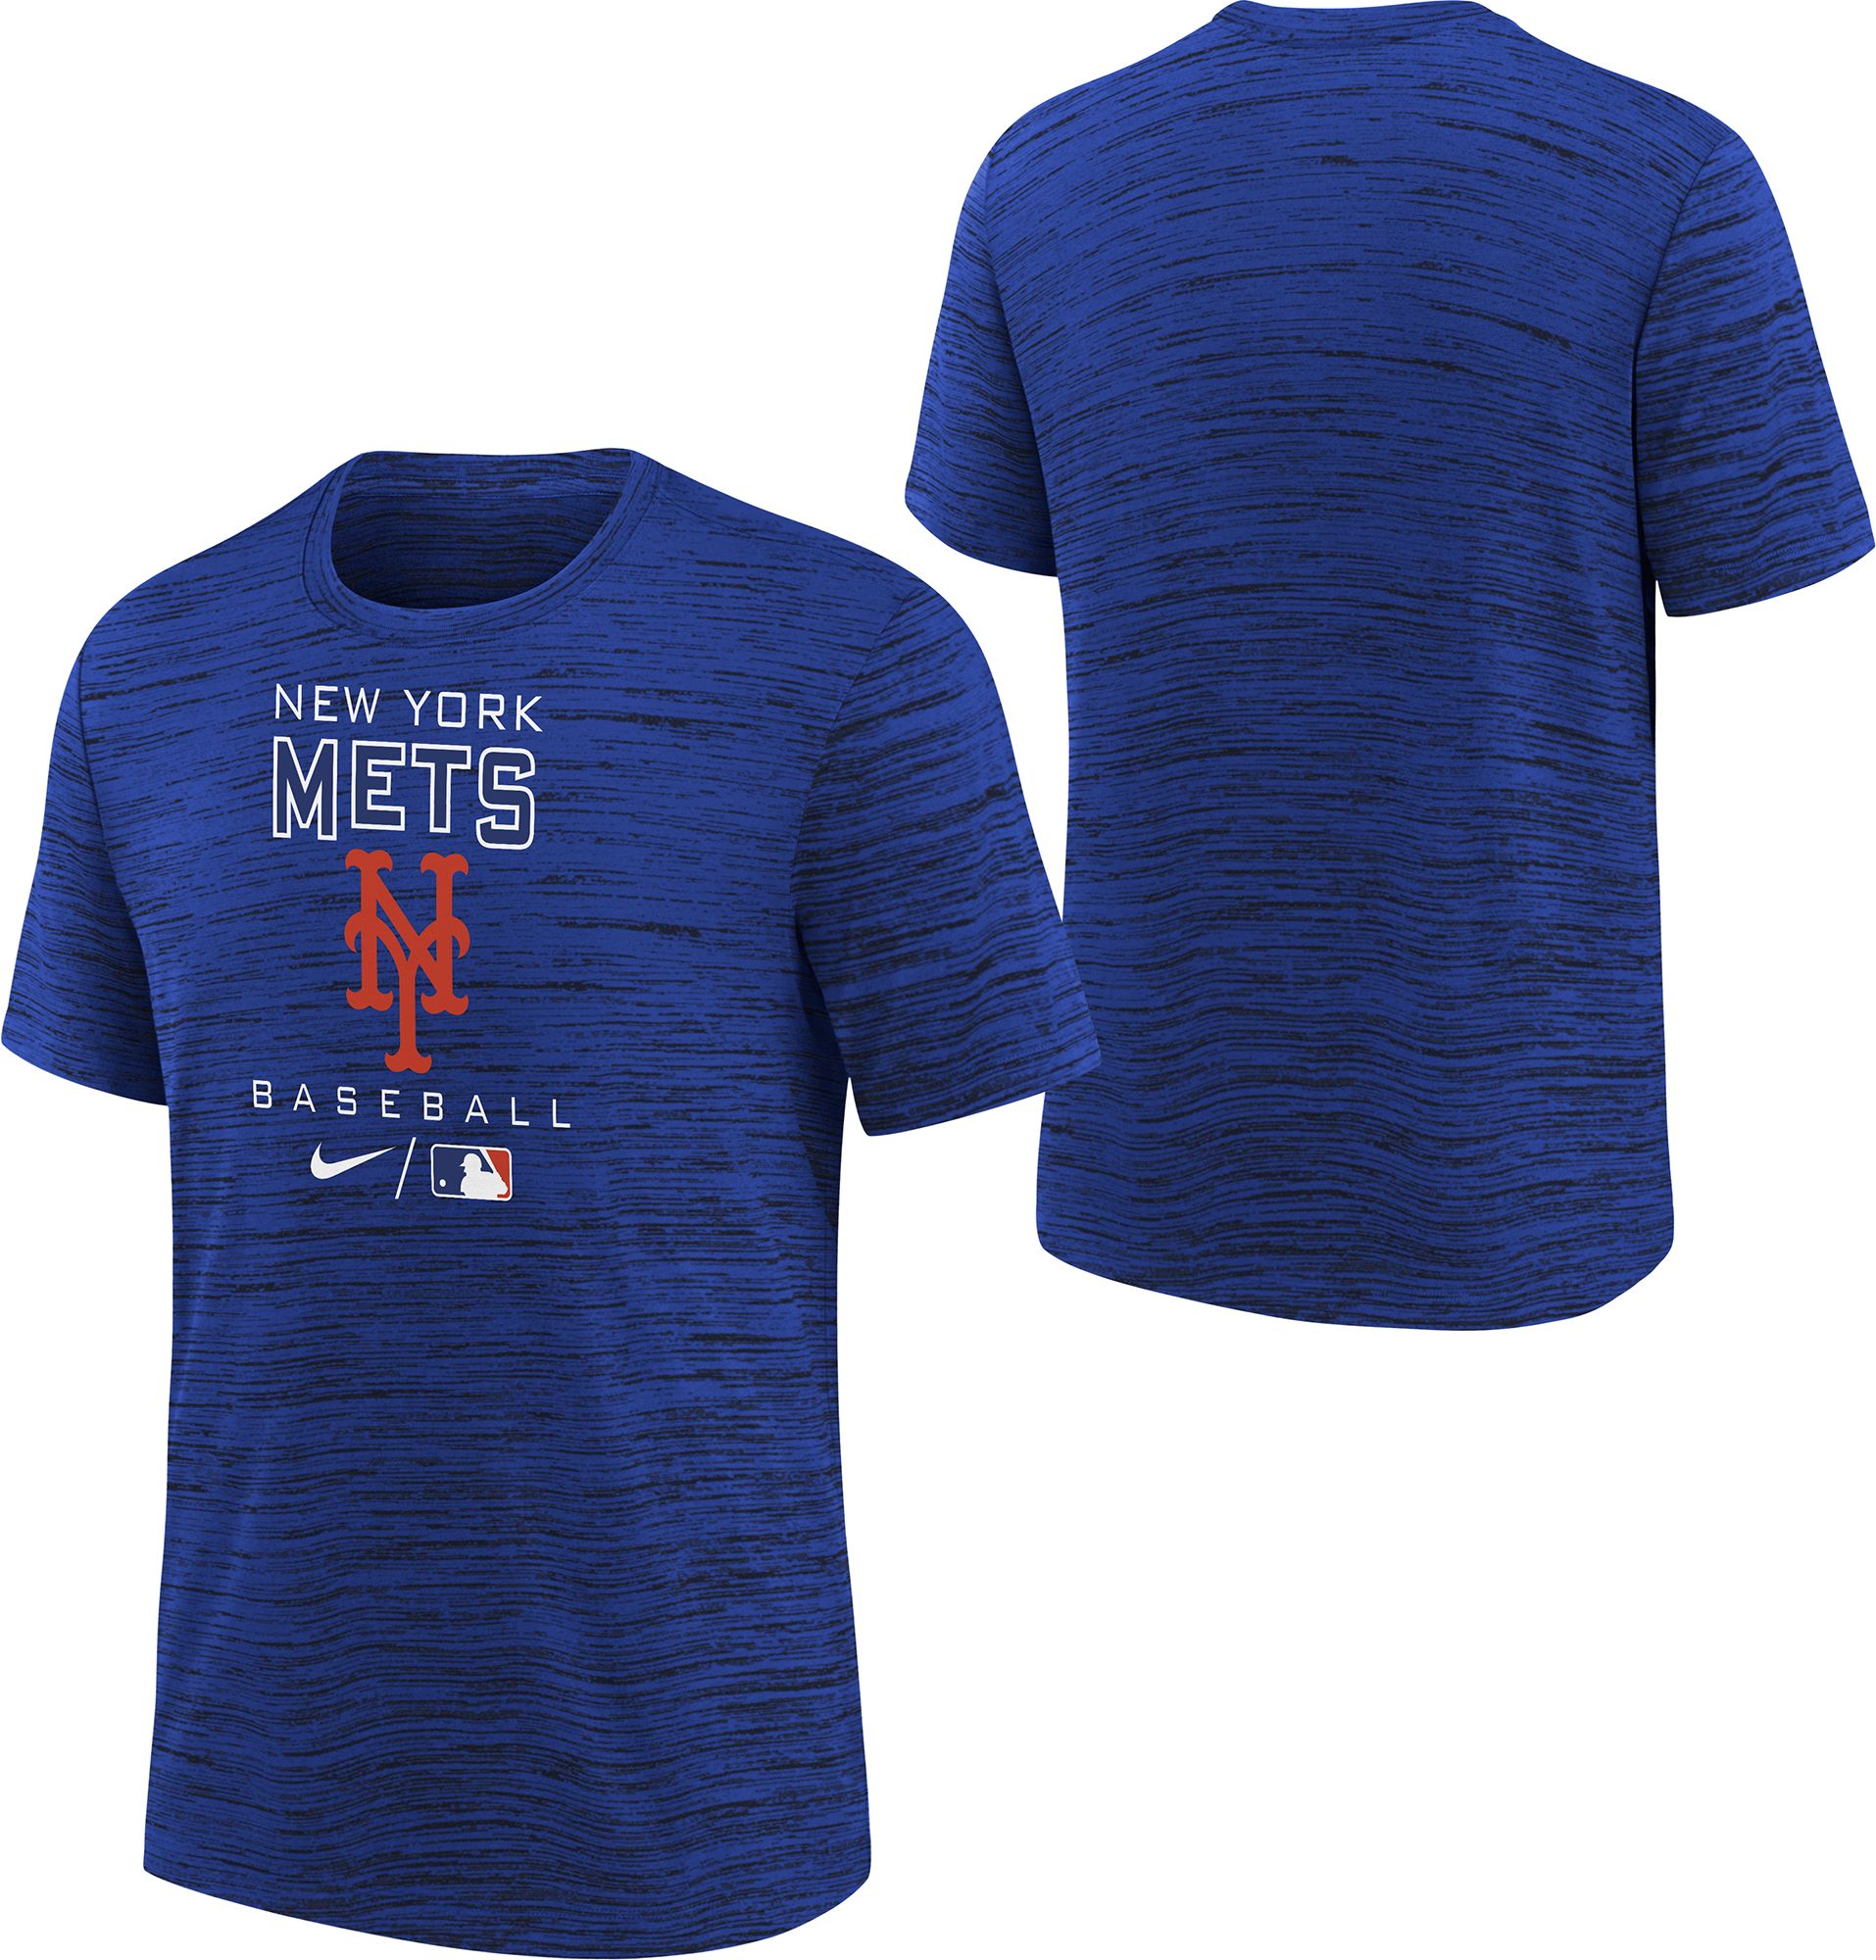 Nike / Youth Boys' New York Mets Blue Authentic Collection Velocity